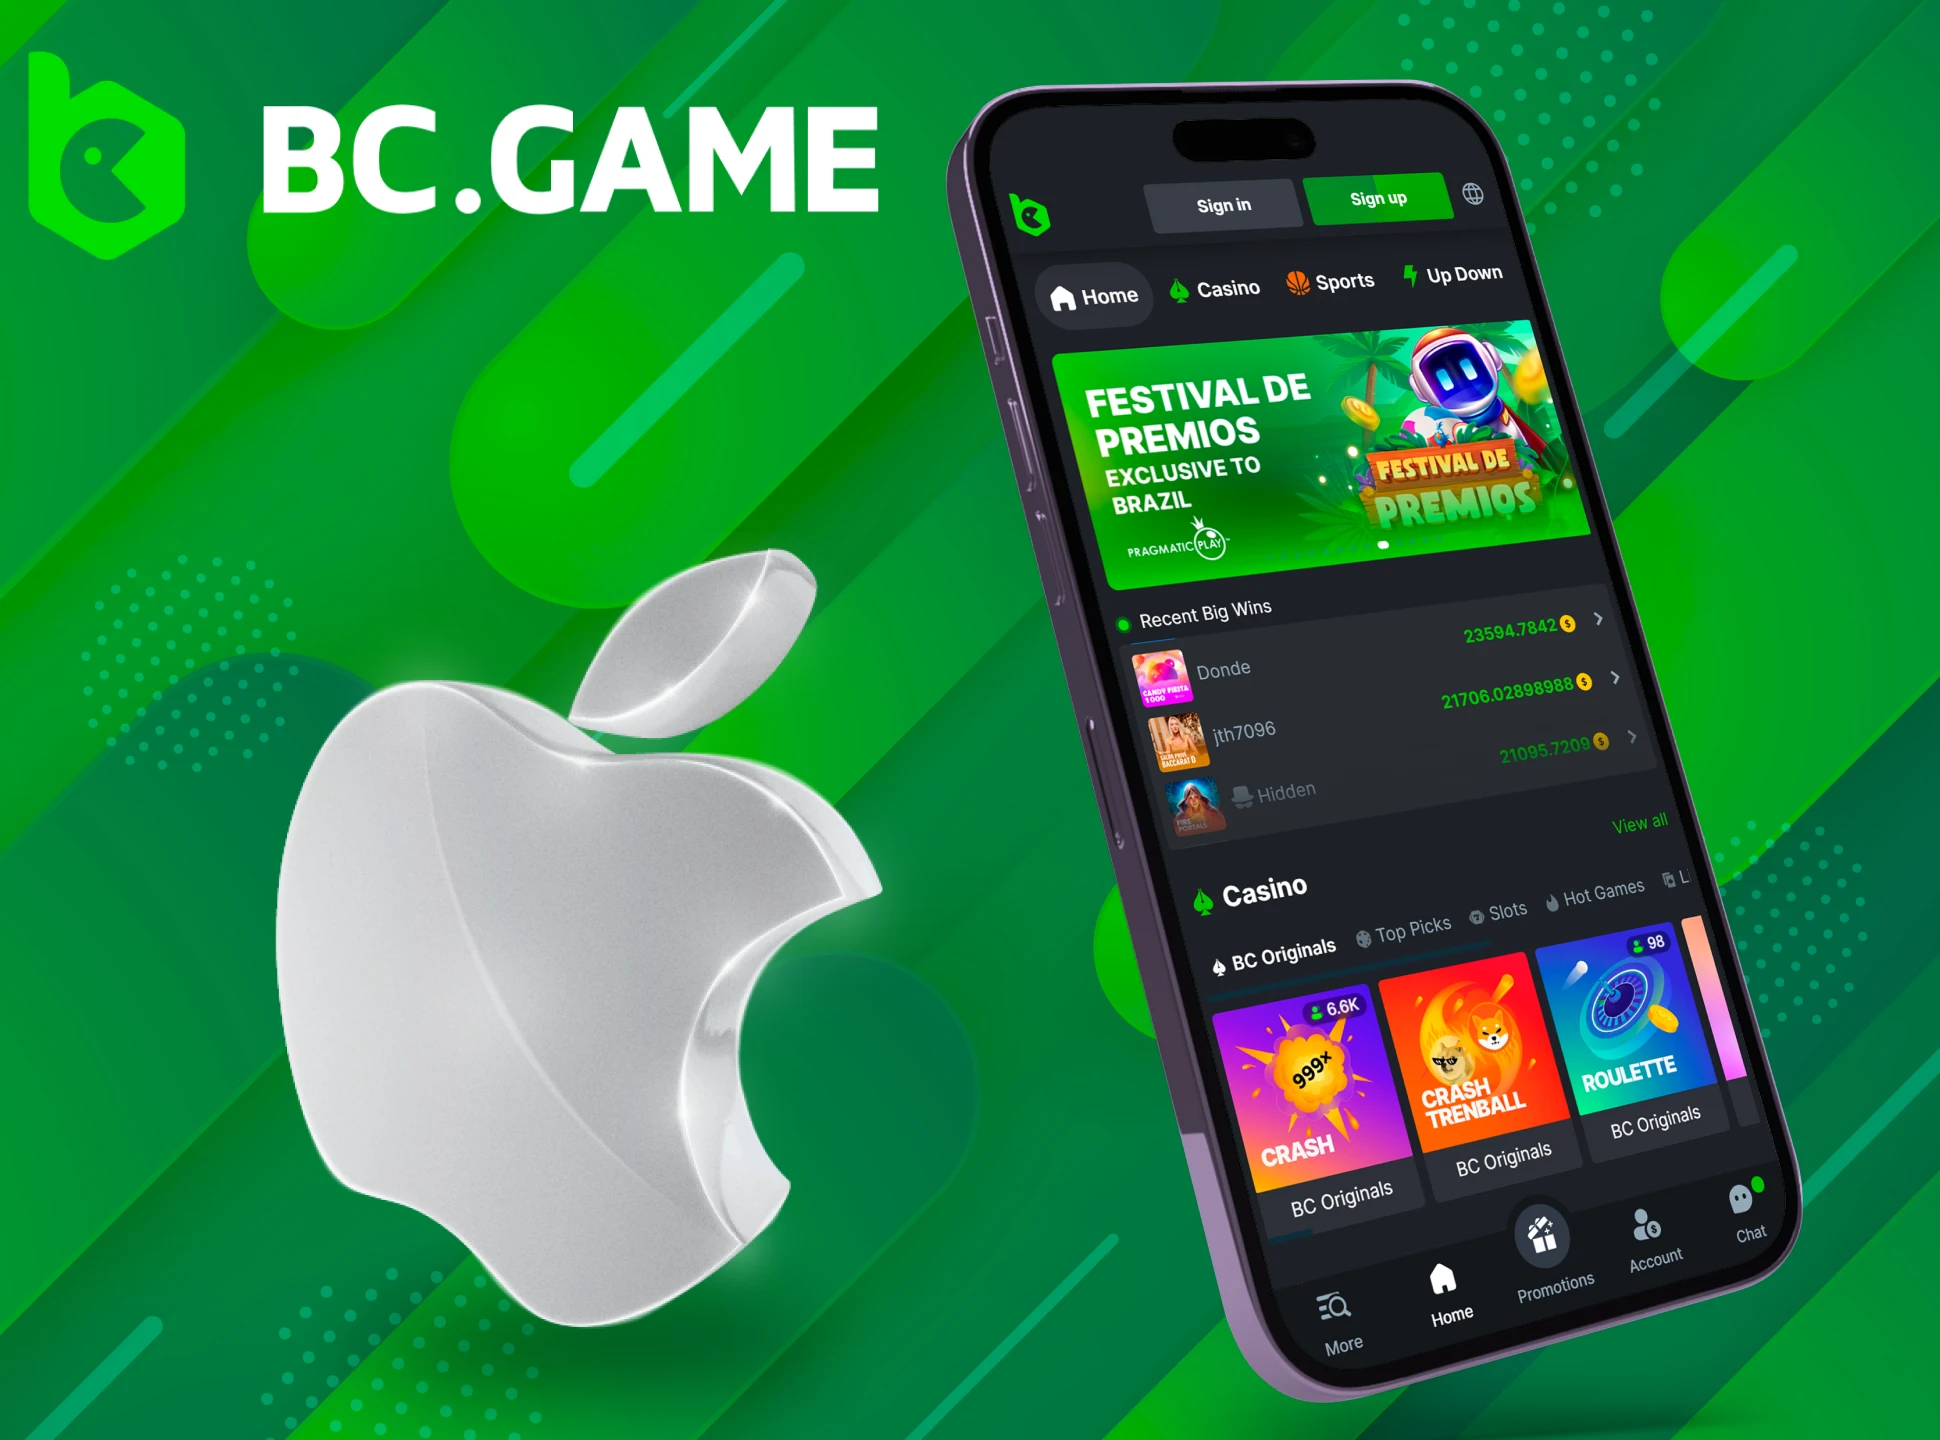 Place your bets and play at the casino using the BC Game app for iOS.